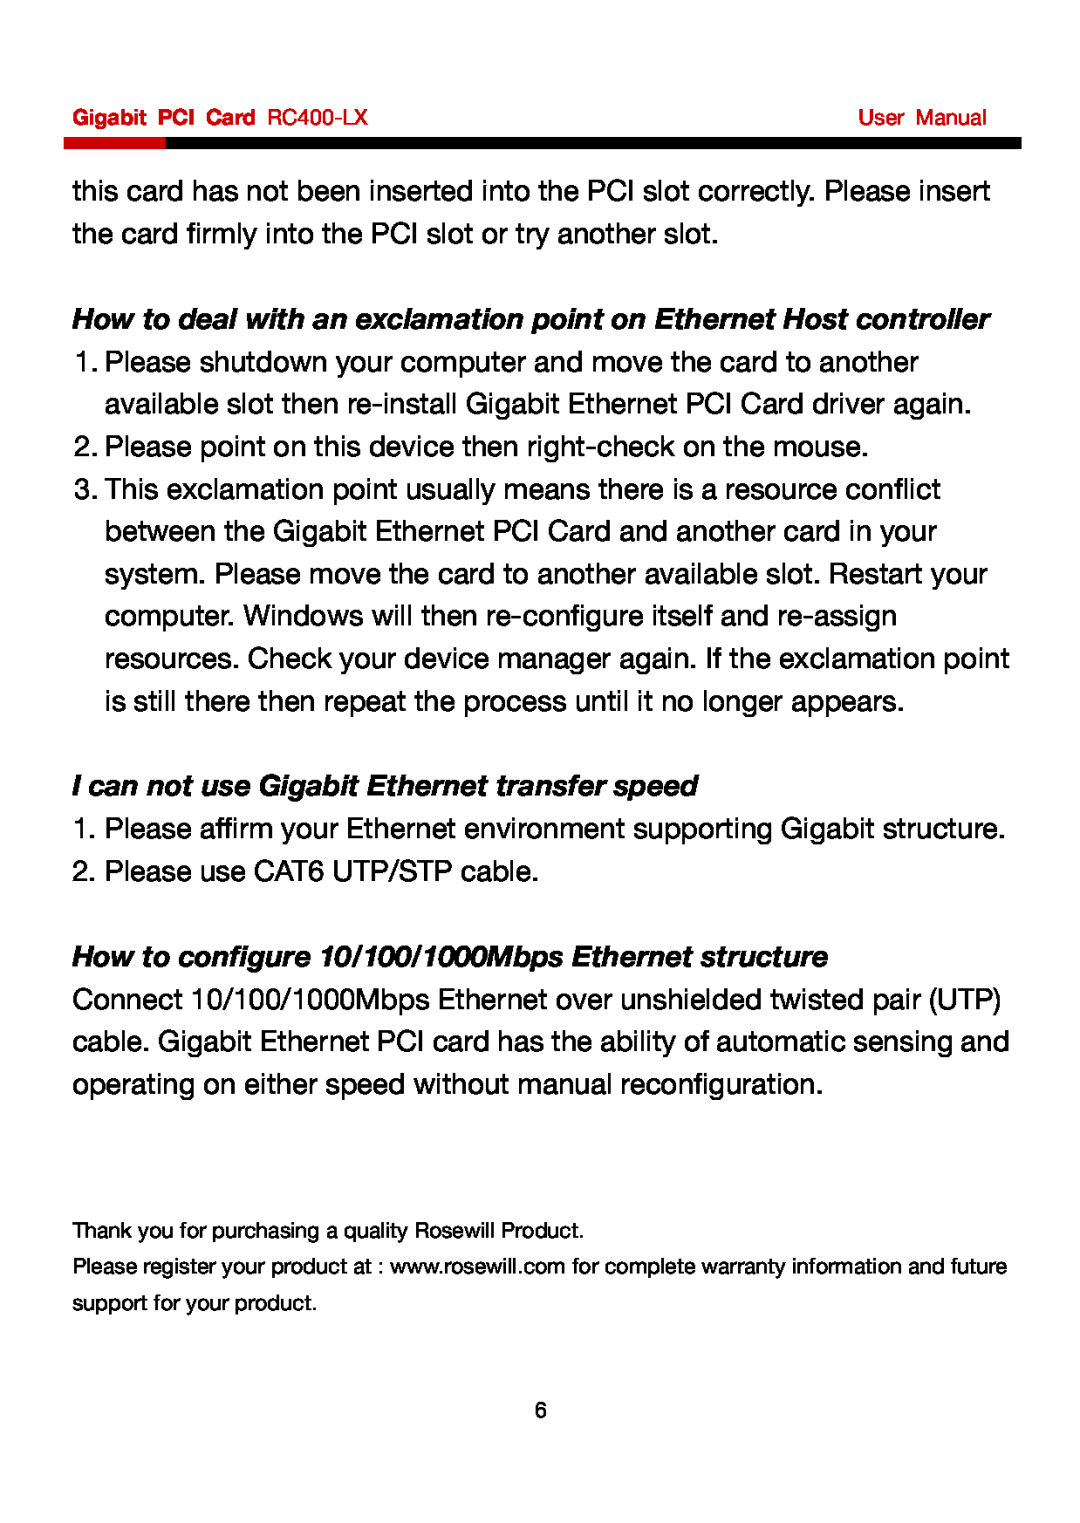 Rosewill RC-400 user manual How to deal with an exclamation point on Ethernet Host controller 